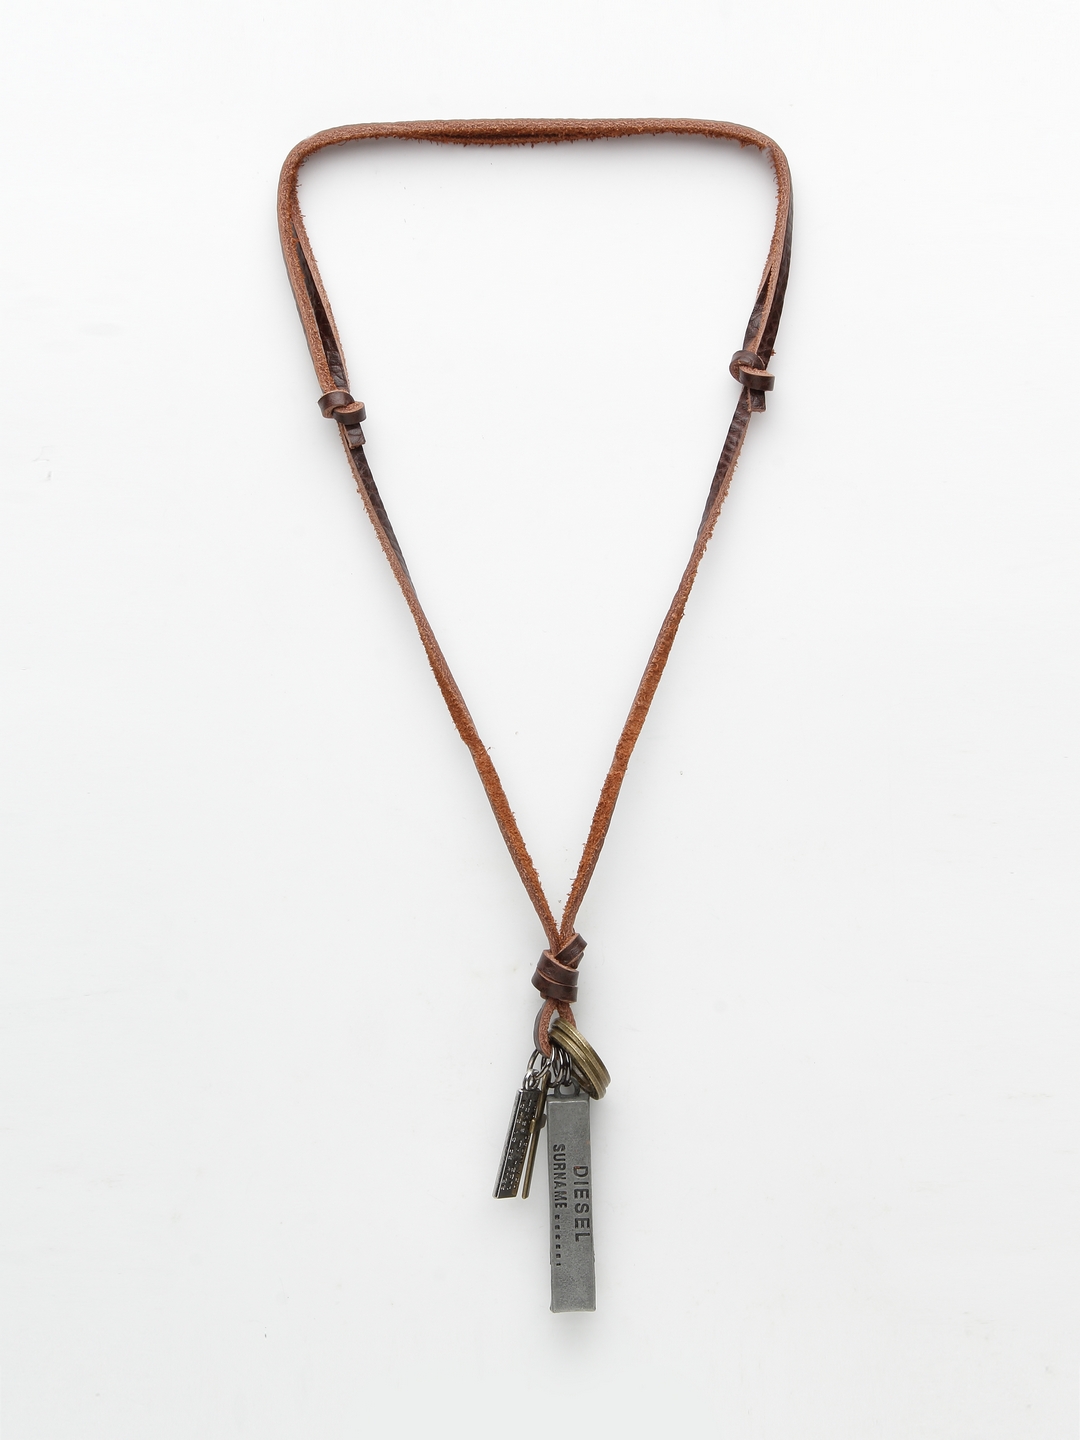 Men's Raindrop Necklace / Solid Sterling Silver / Rustic Hammer Forged Drop  / Adjustable Leather Cord